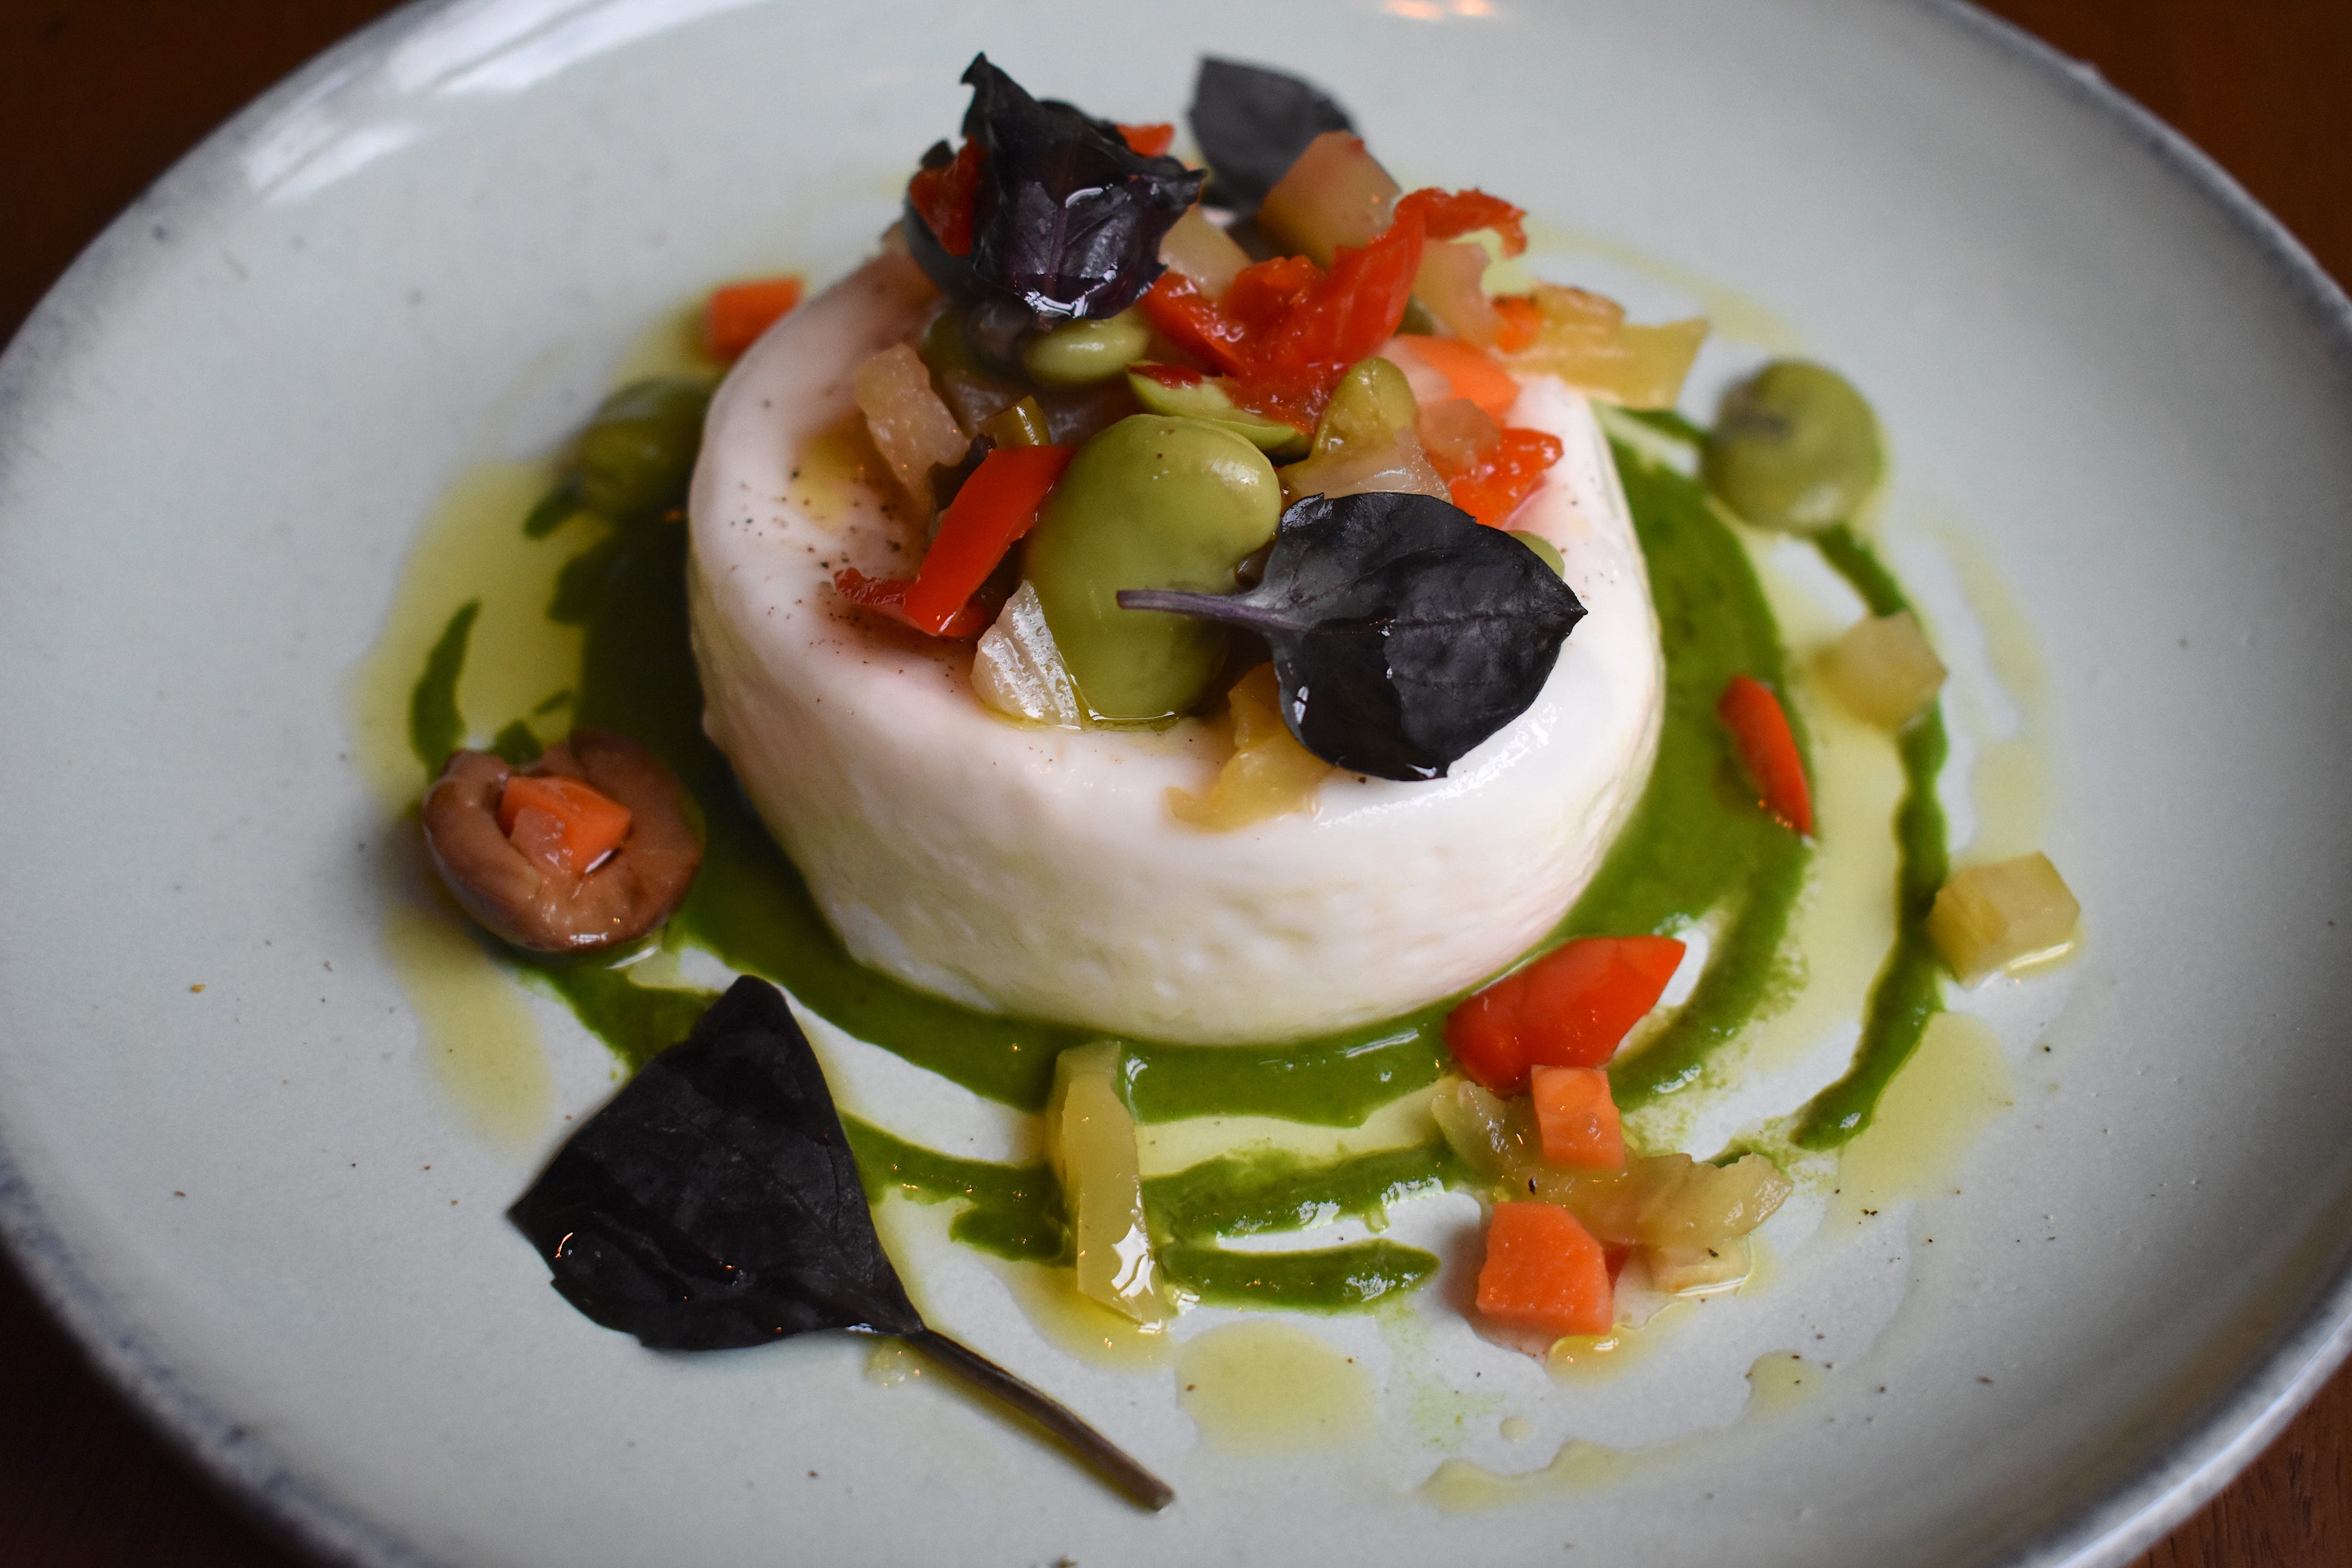 A creamy burrata appetizer is garnished with fava beans, arugula pesto, and opal basil.